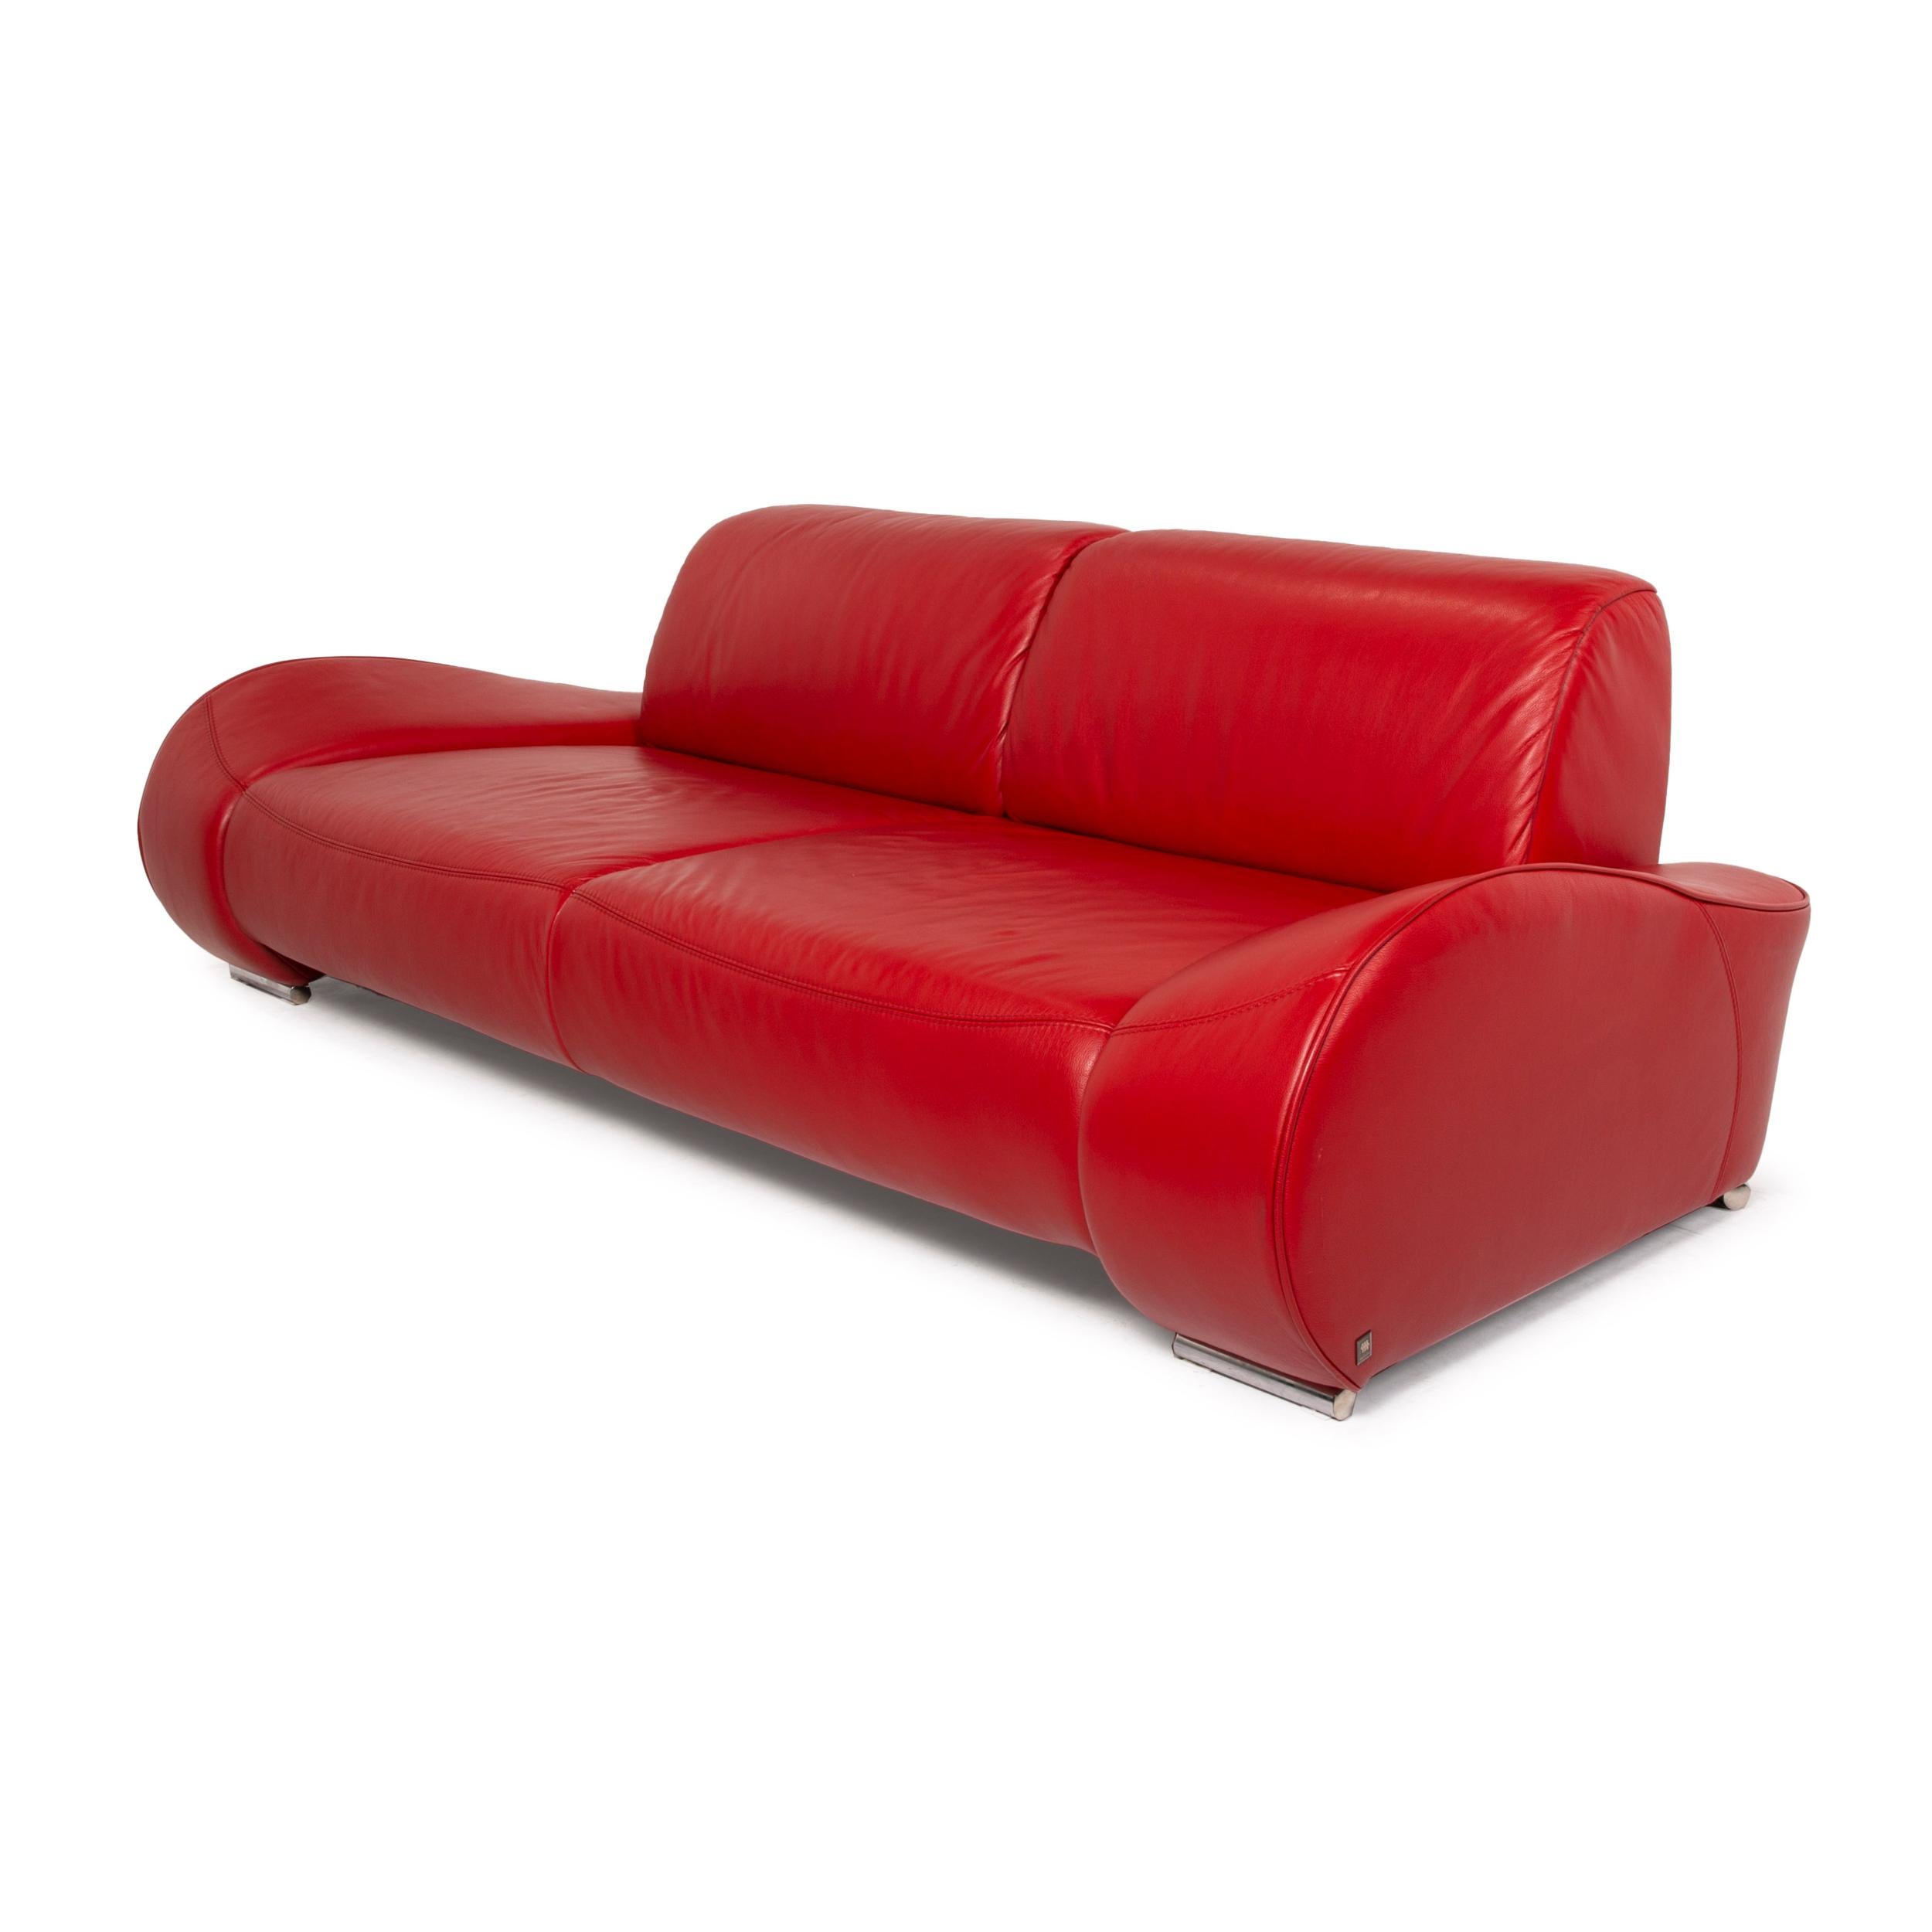 Musterring Mr-740 Leather Sofa Red Three-Seater Function 5